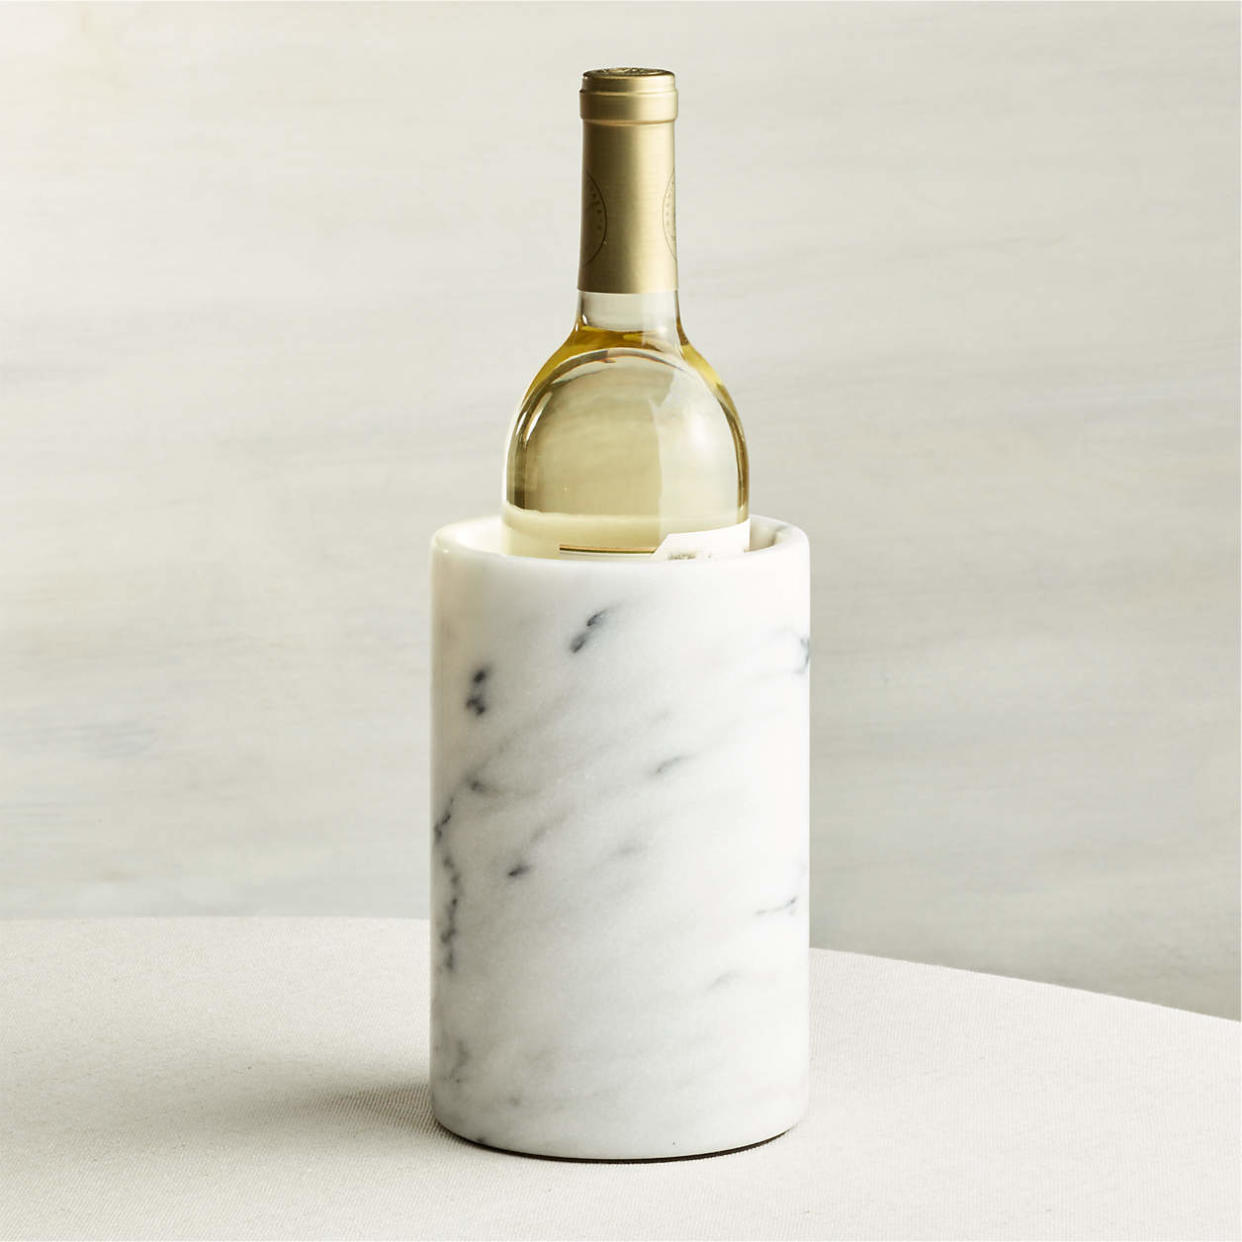 French Kitchen Marble Wine Cooler (Crate & Barrel / Crate & Barrel)